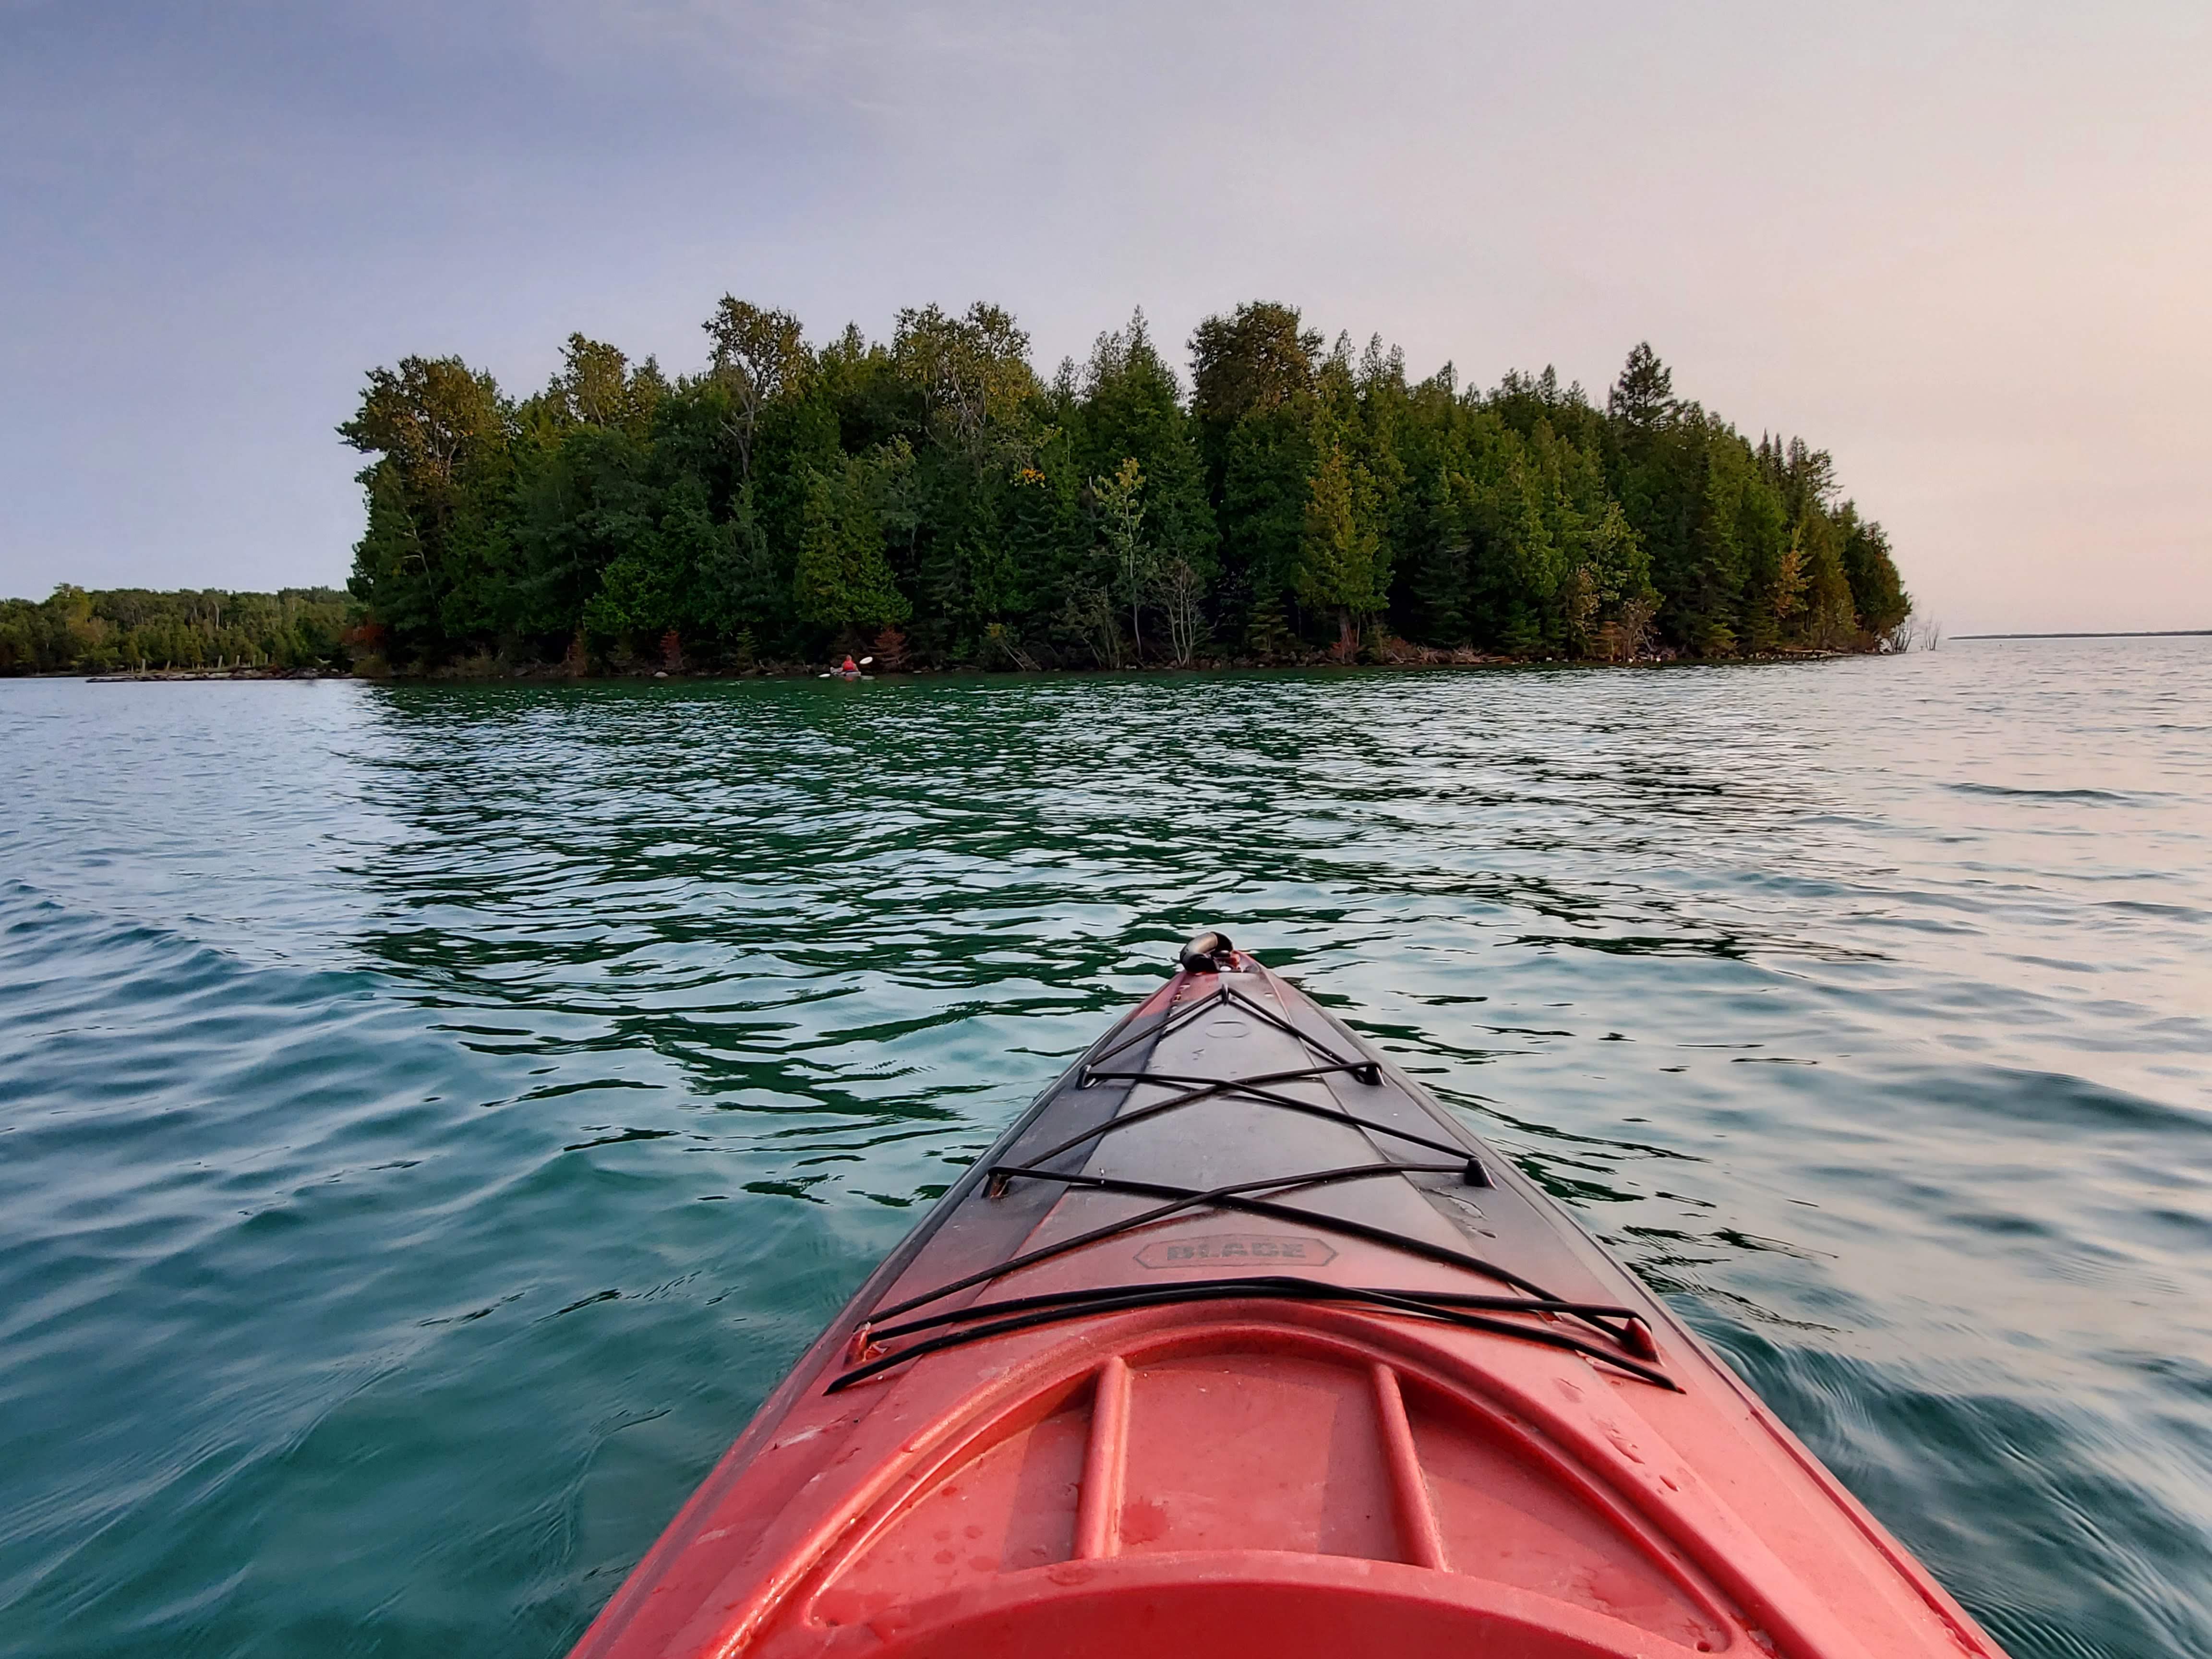 Kayaking the St. Mary's River, Drummond Island, September